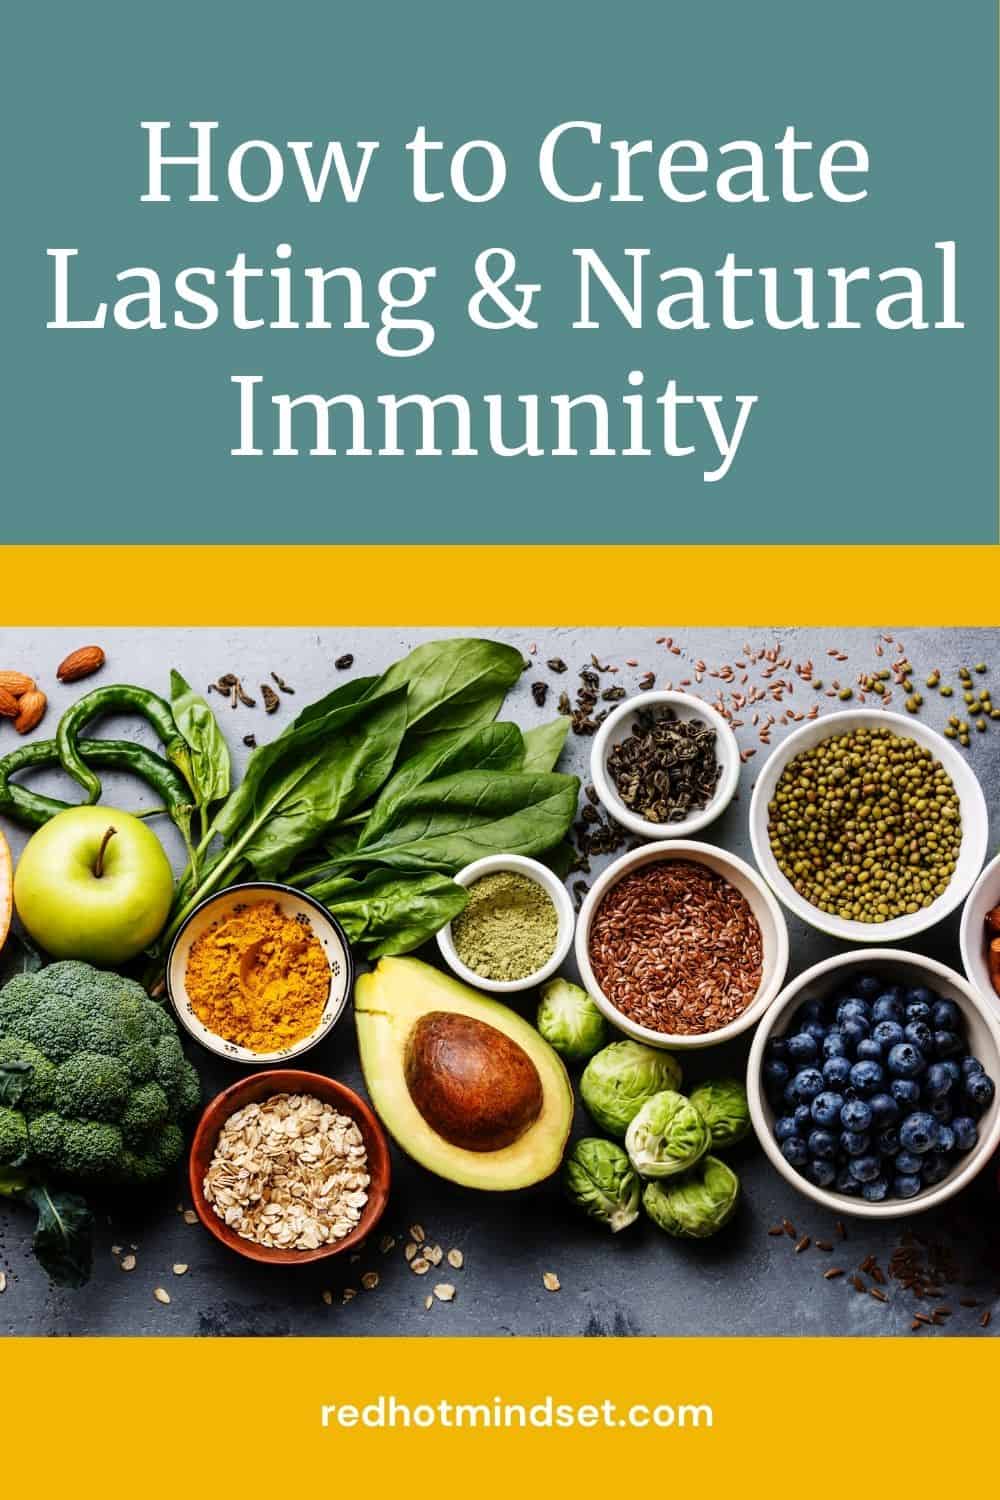 Ep 111 | How to Take Care of Your Immune System (so it can take care of you)!